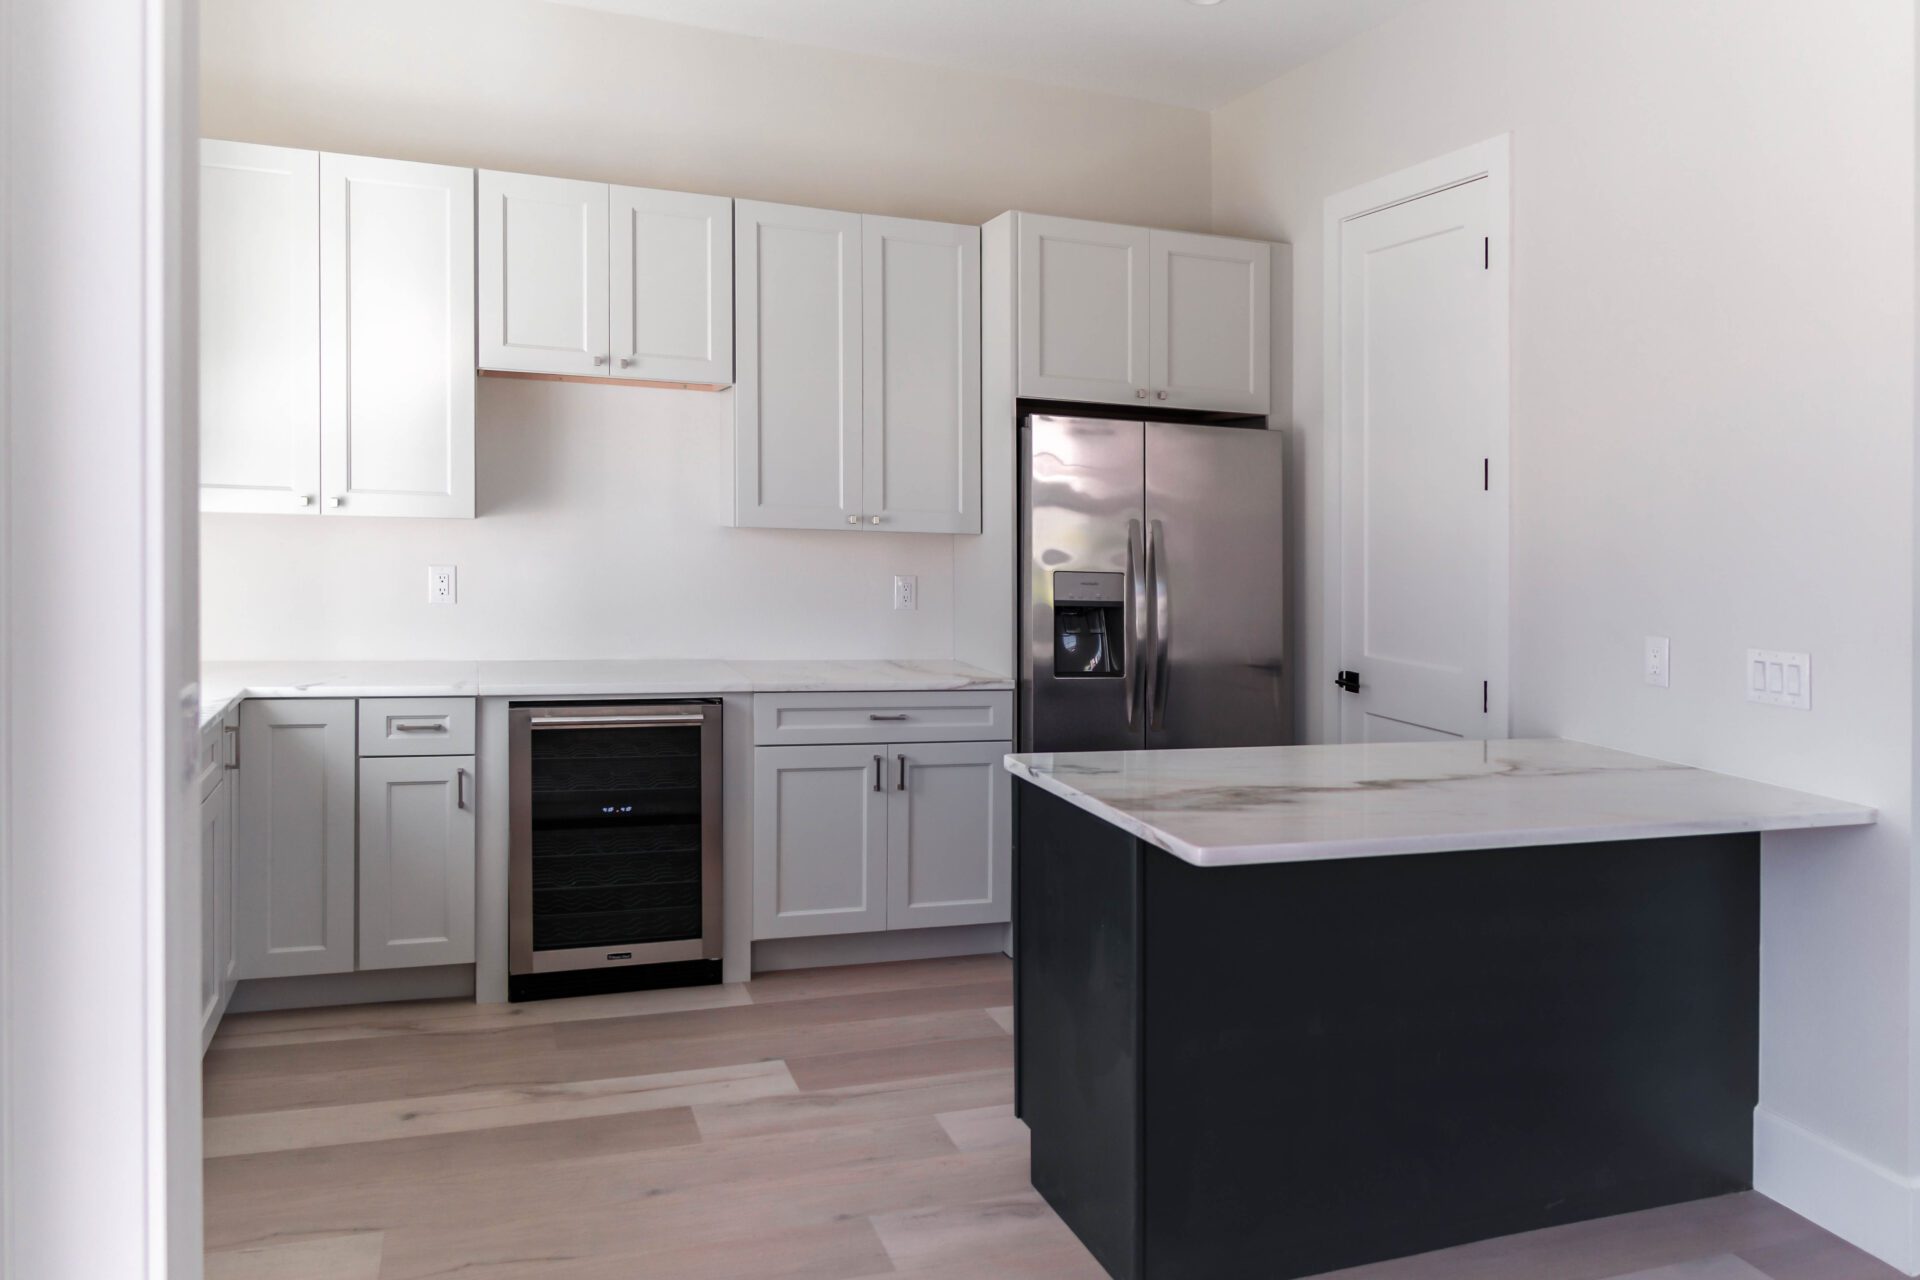 A kitchen with white cupboards